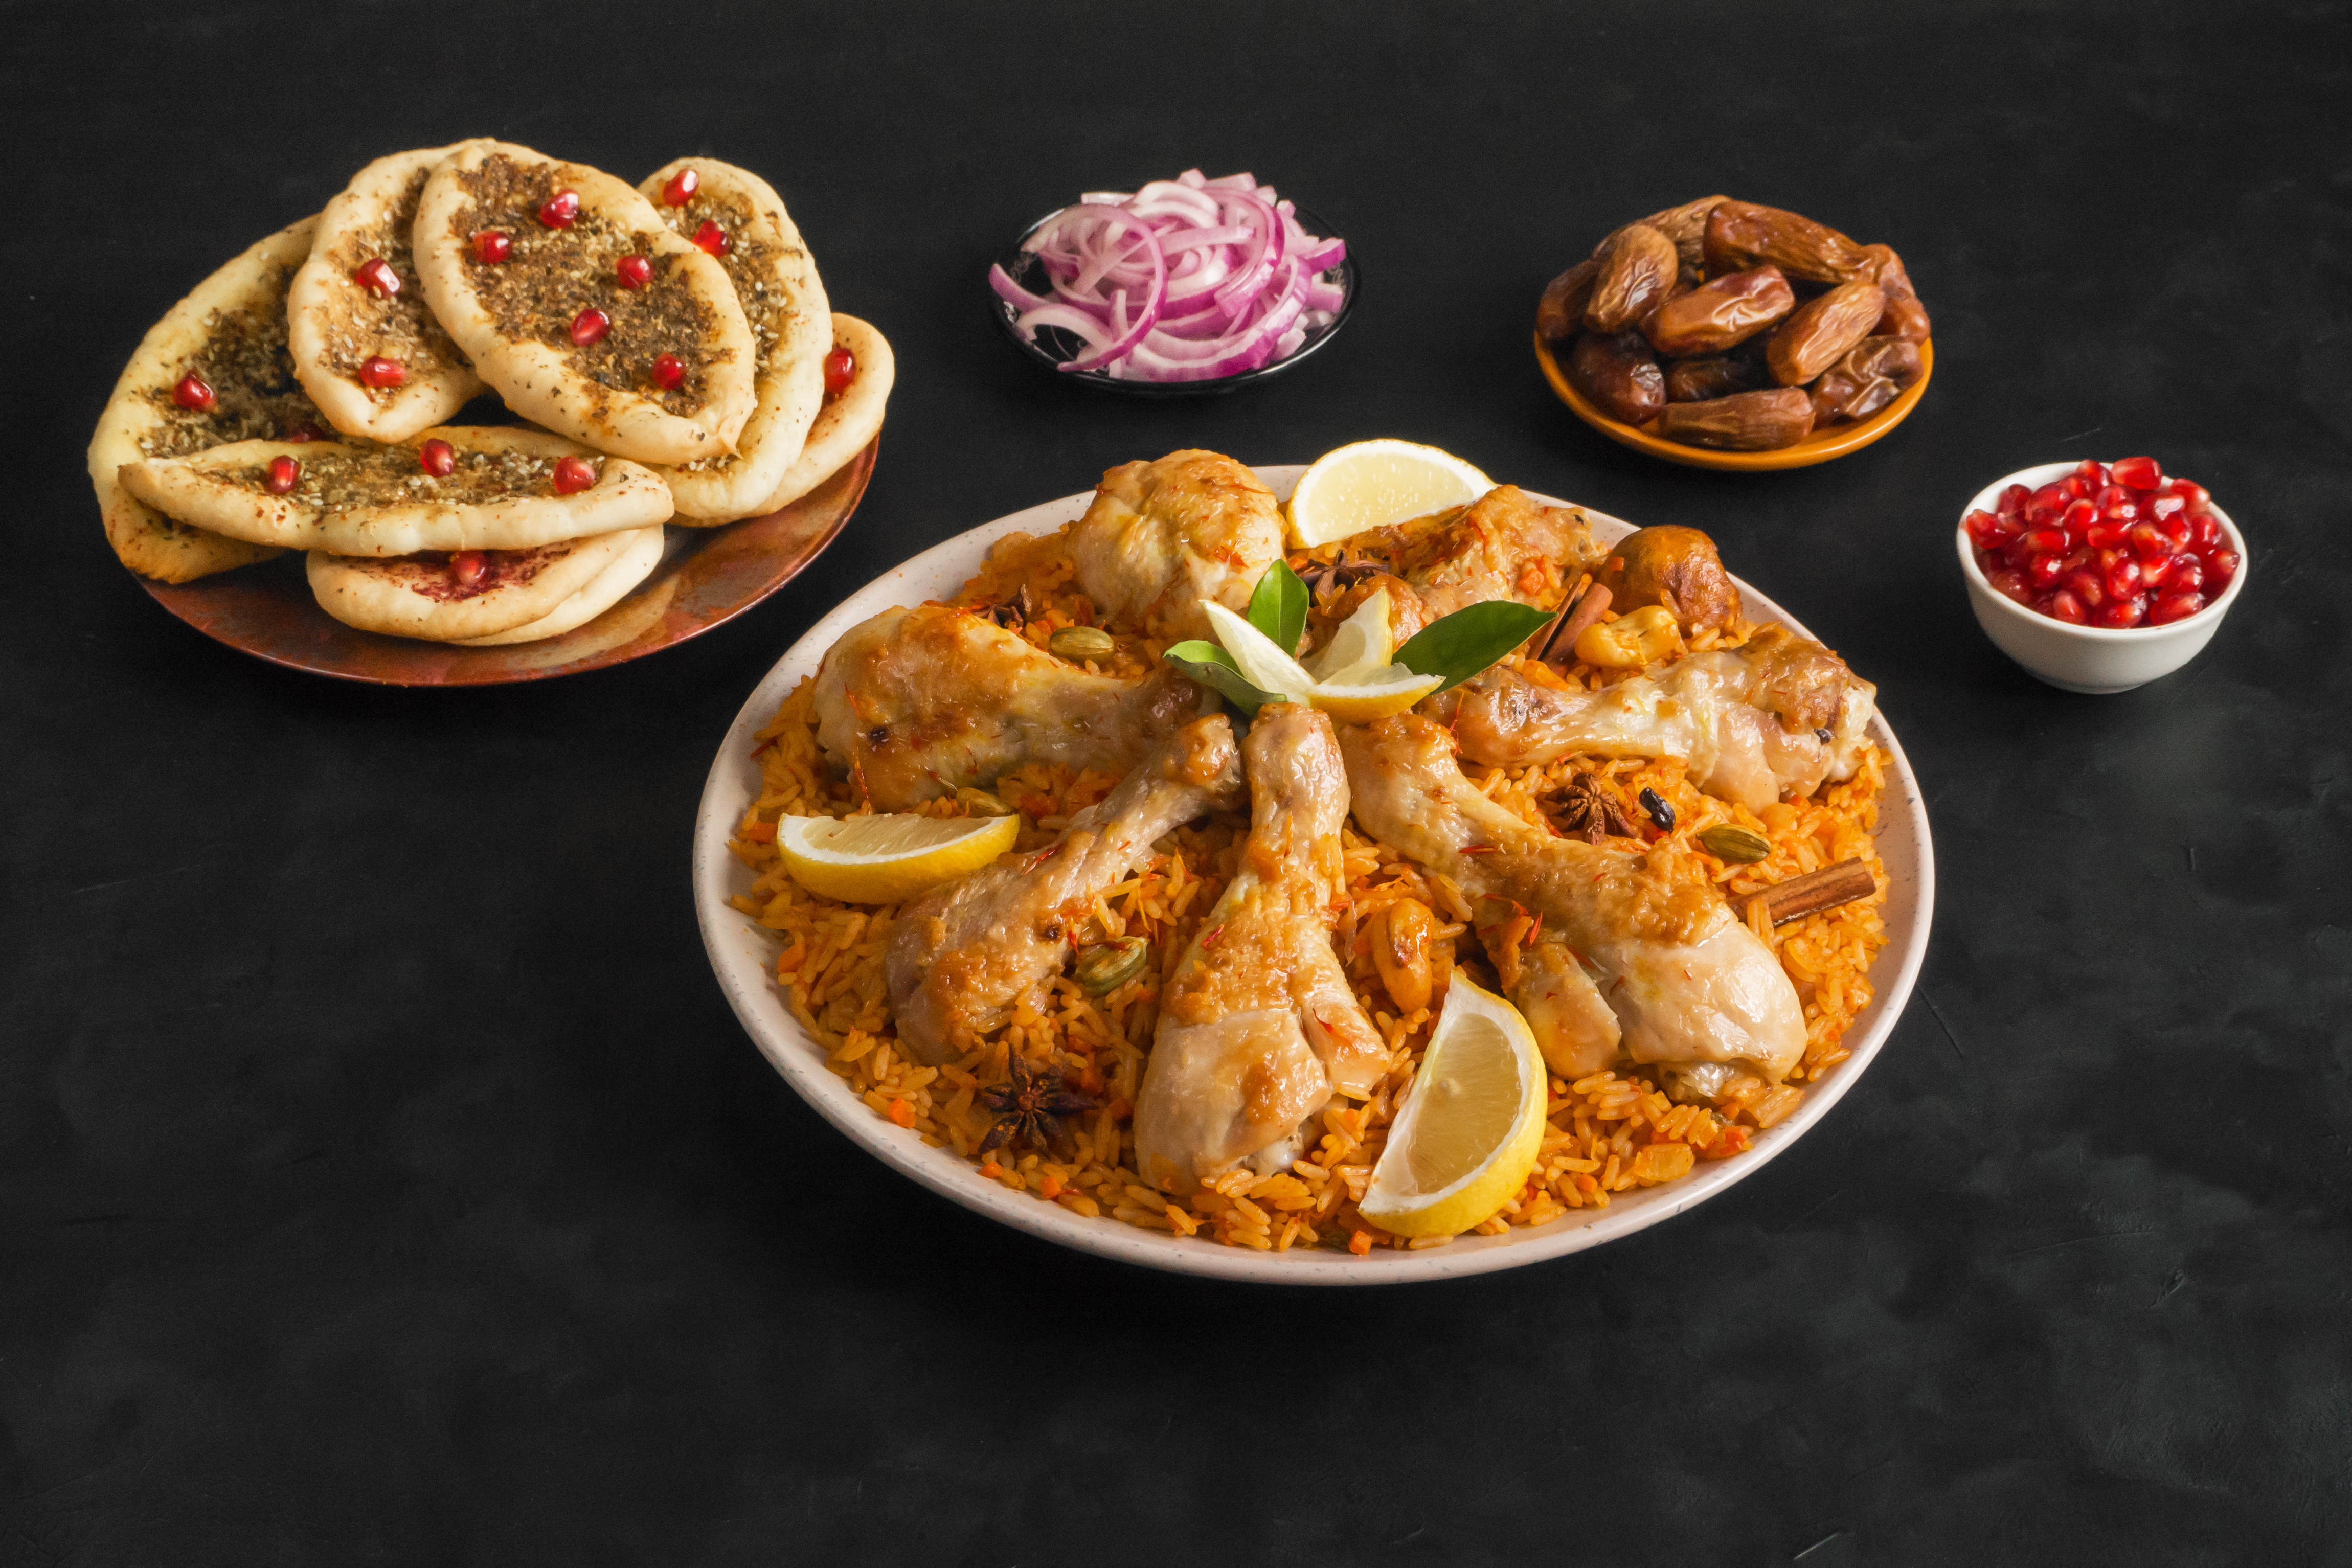 A large plate piled high with spiced rice, chicken legs and lemon wedges (Qatari chicken majboos) in the centre of the frame. Arrayed around the large plate are a smaller plate of flatbreads that are topped with herbs and pomegranate seeds, a dish of chopped onion, a dish of dates, and a dish of pomegranate seeds.